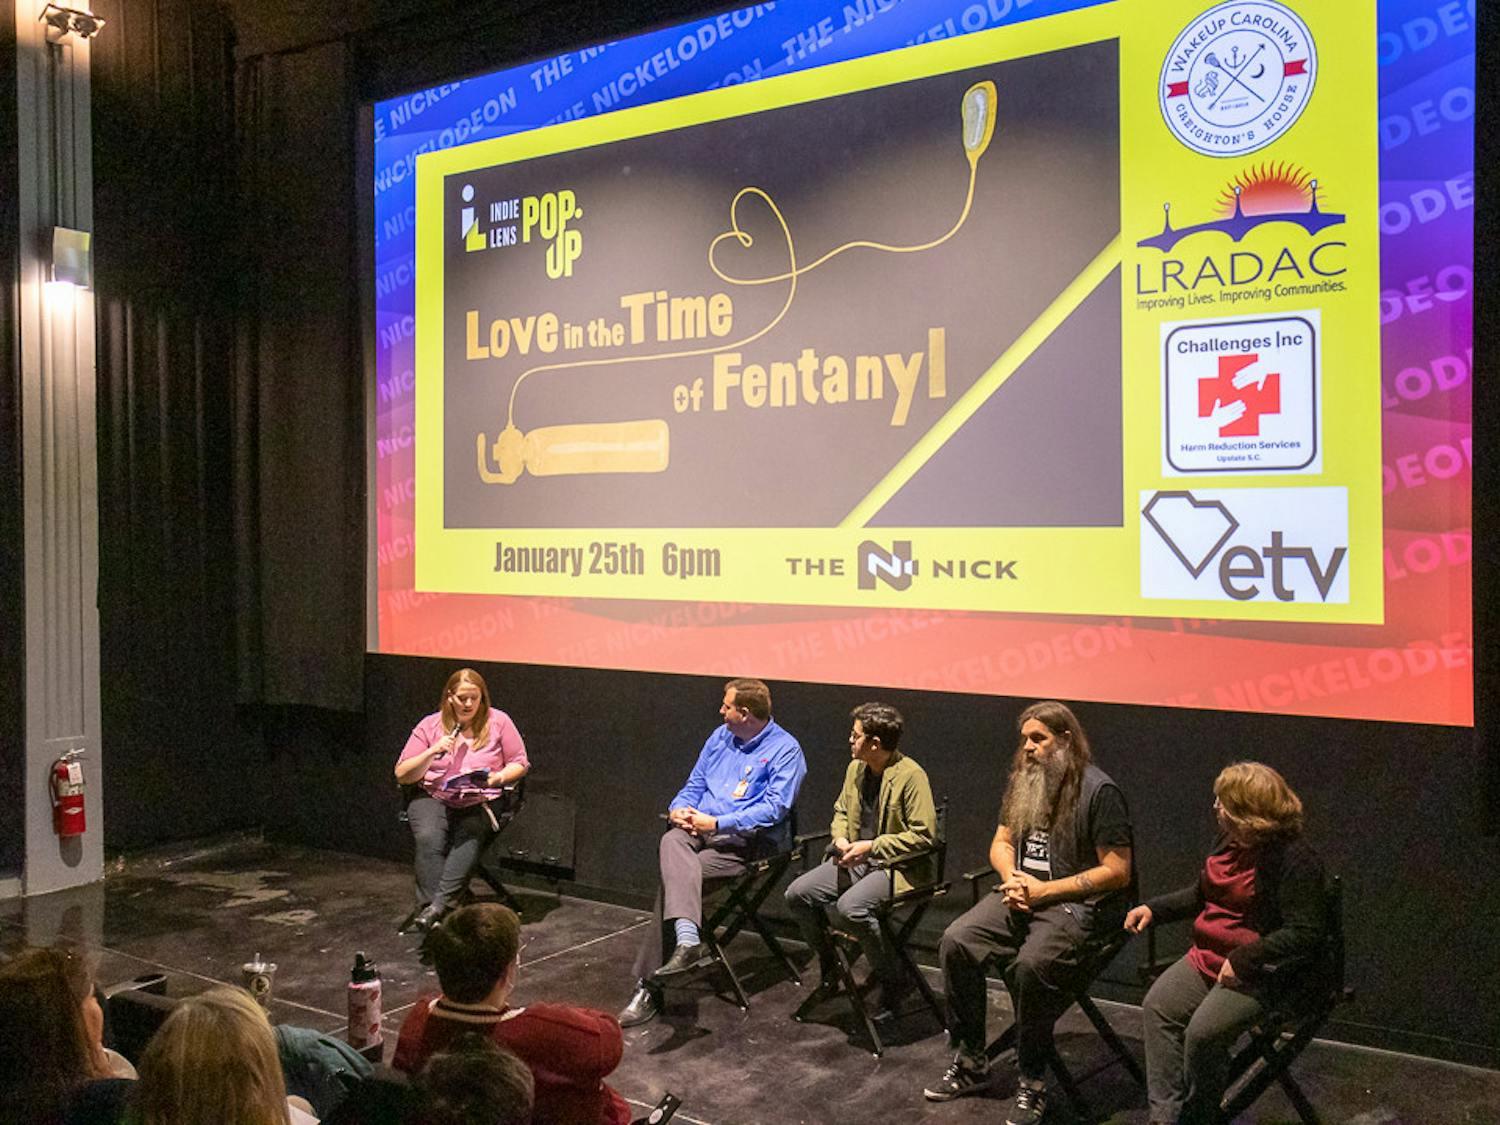 The Nickelodeon Theatre held an early showing of "Love in the Time of Fentanyl" on Feb. 25, 2023. The documentary created as a segment of PBS 'Indie Lens Pop-Up' docuseries covers Ronnie Grigg and other staff members at an Overdose Prevention Service office in Vancouver, Canada as they work with members of the community dealing with the ever-worsening fentanyl epidemic while showing the human element of those struggling with addiction. The film was followed by a Q&amp;A panel consisting of medical experts and harm reduction specialists from around South Carolina and training on how to properly administer Narcan in case of an overdose.&nbsp;